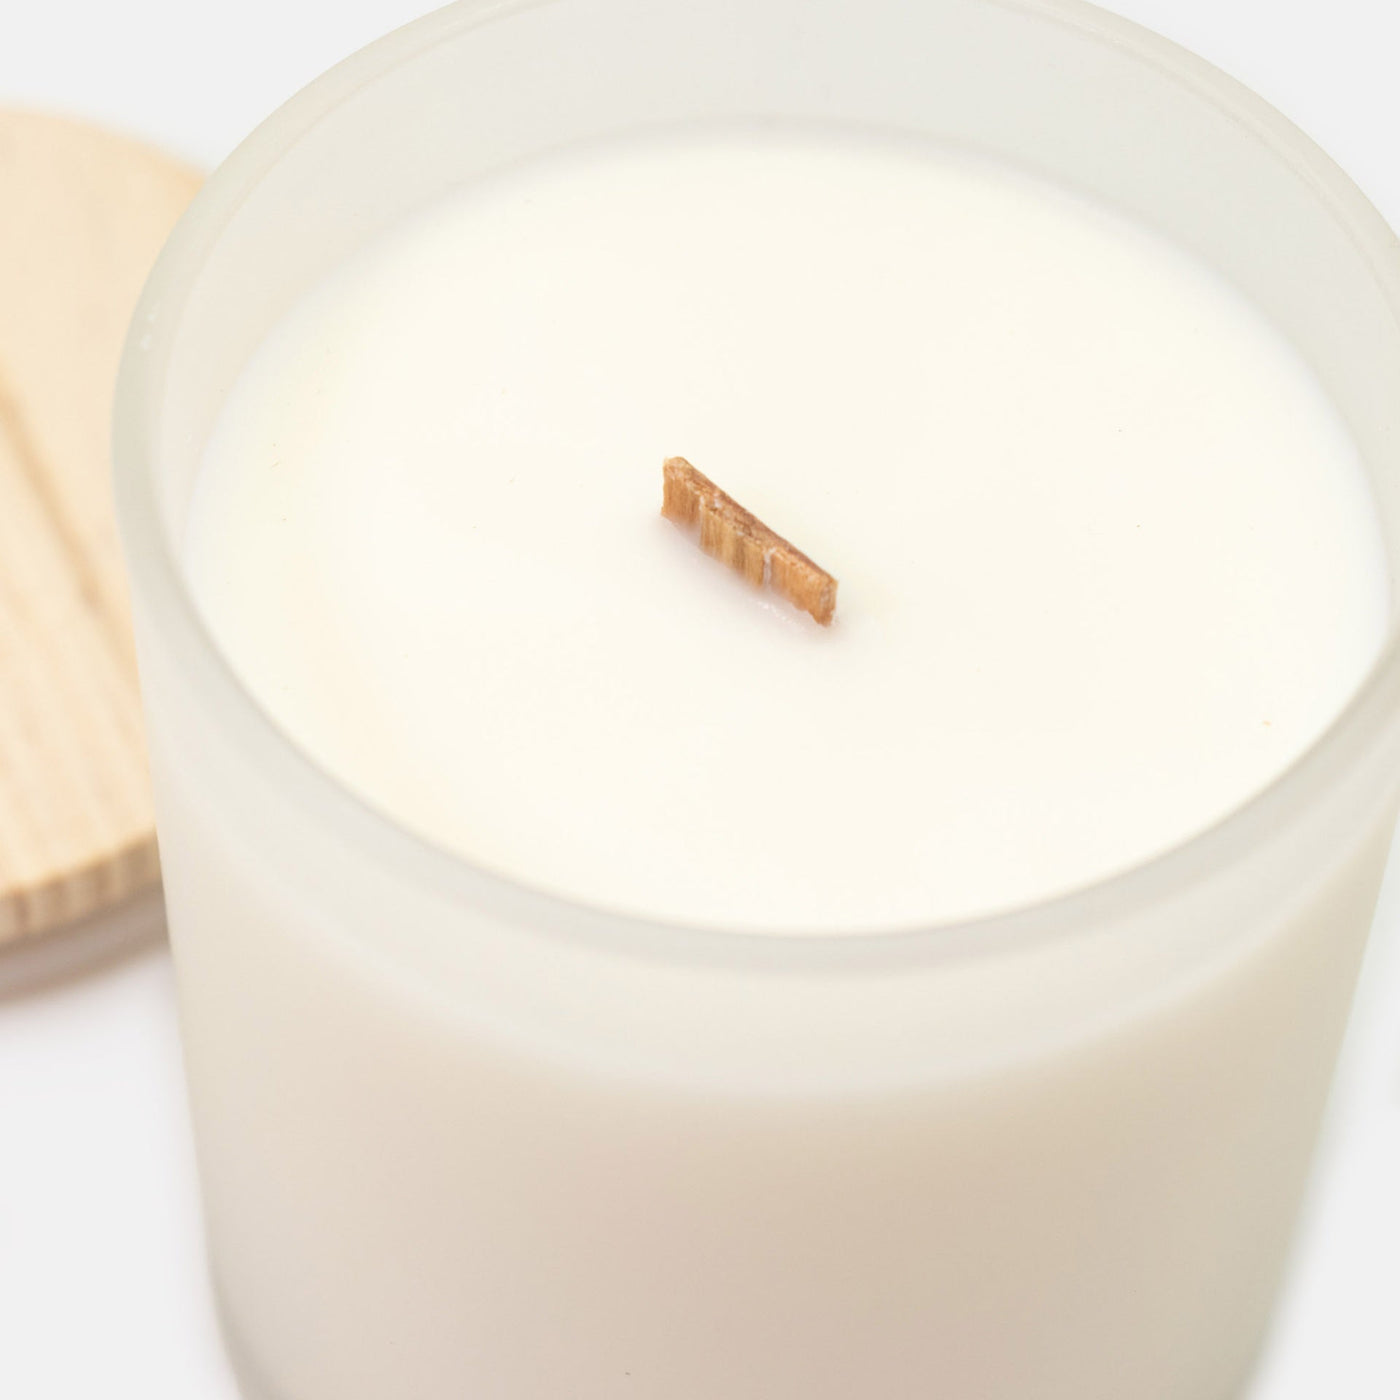 The Roost | 11oz Candle | Animal Crossing Candles Threads & Thistles Inventory 